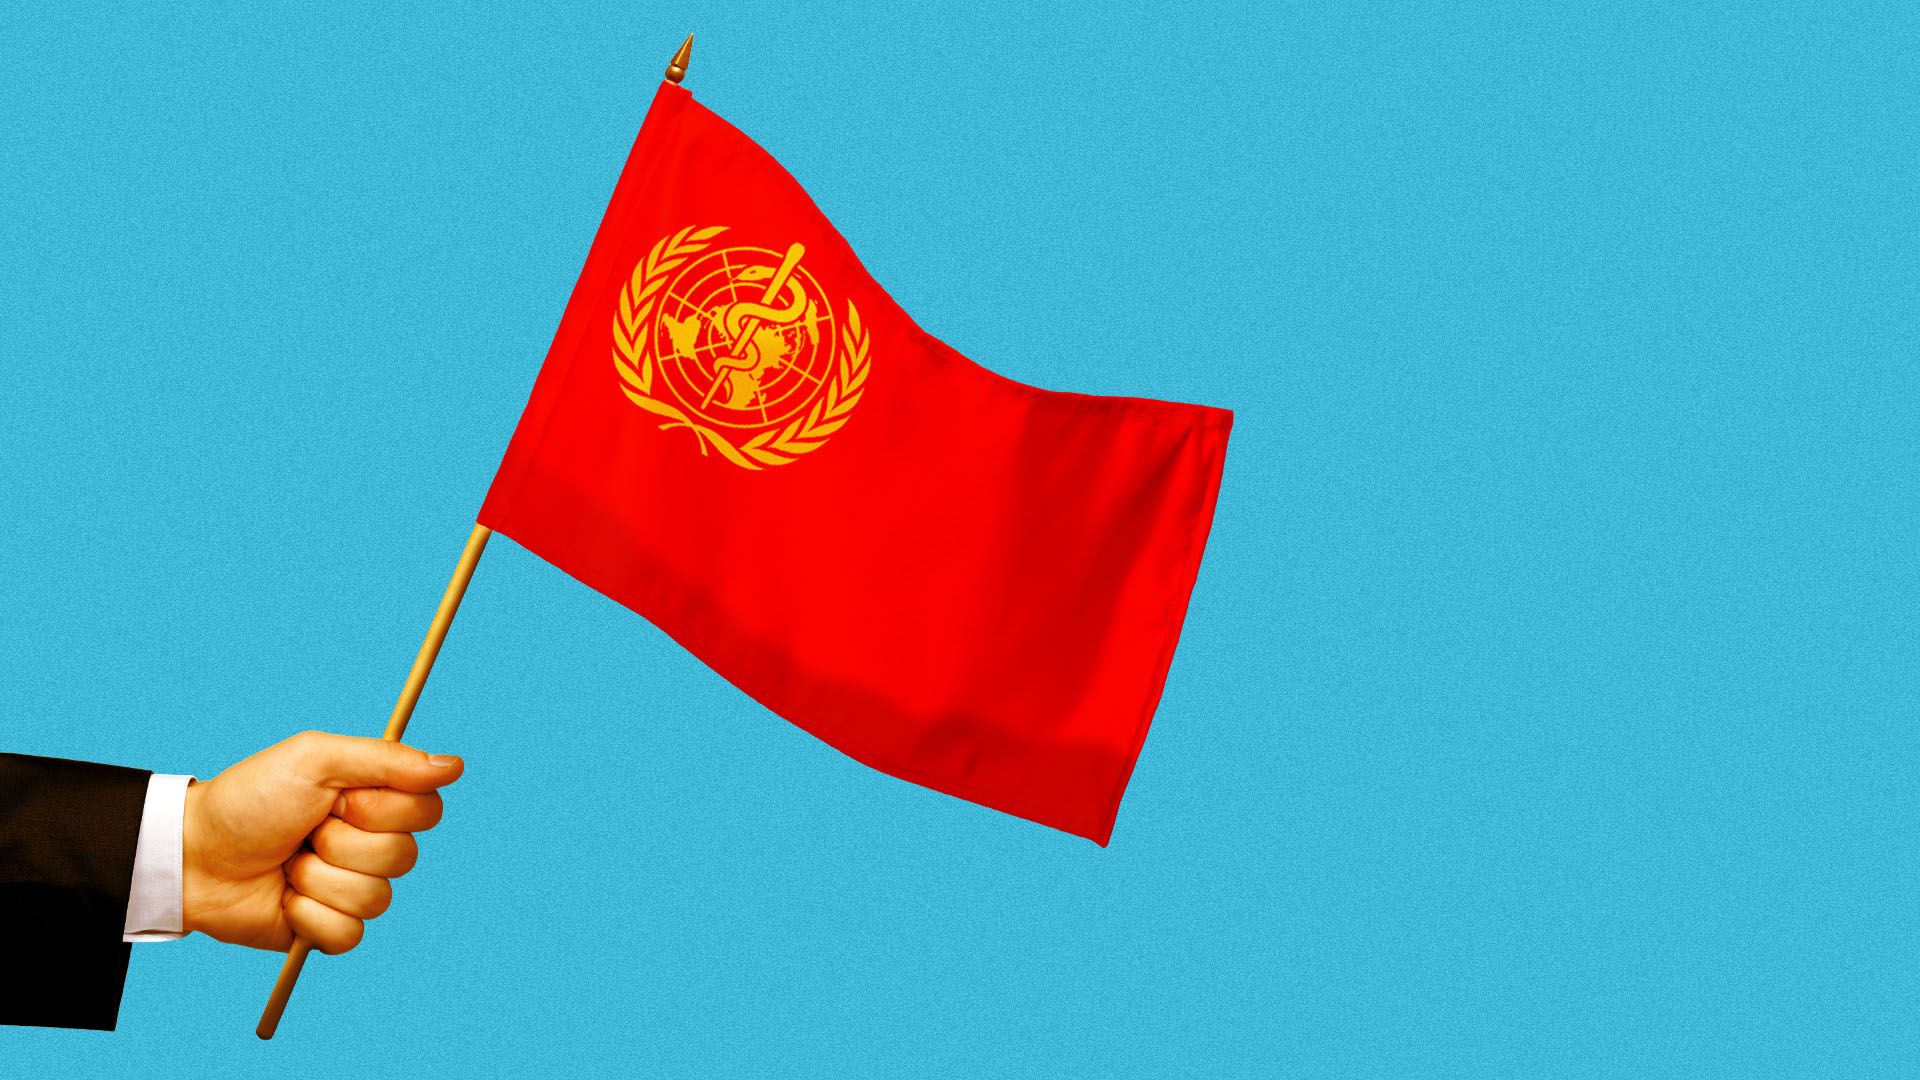 A red Chinese flag with the WHO logo instead of the iconic 5 yellow stars.